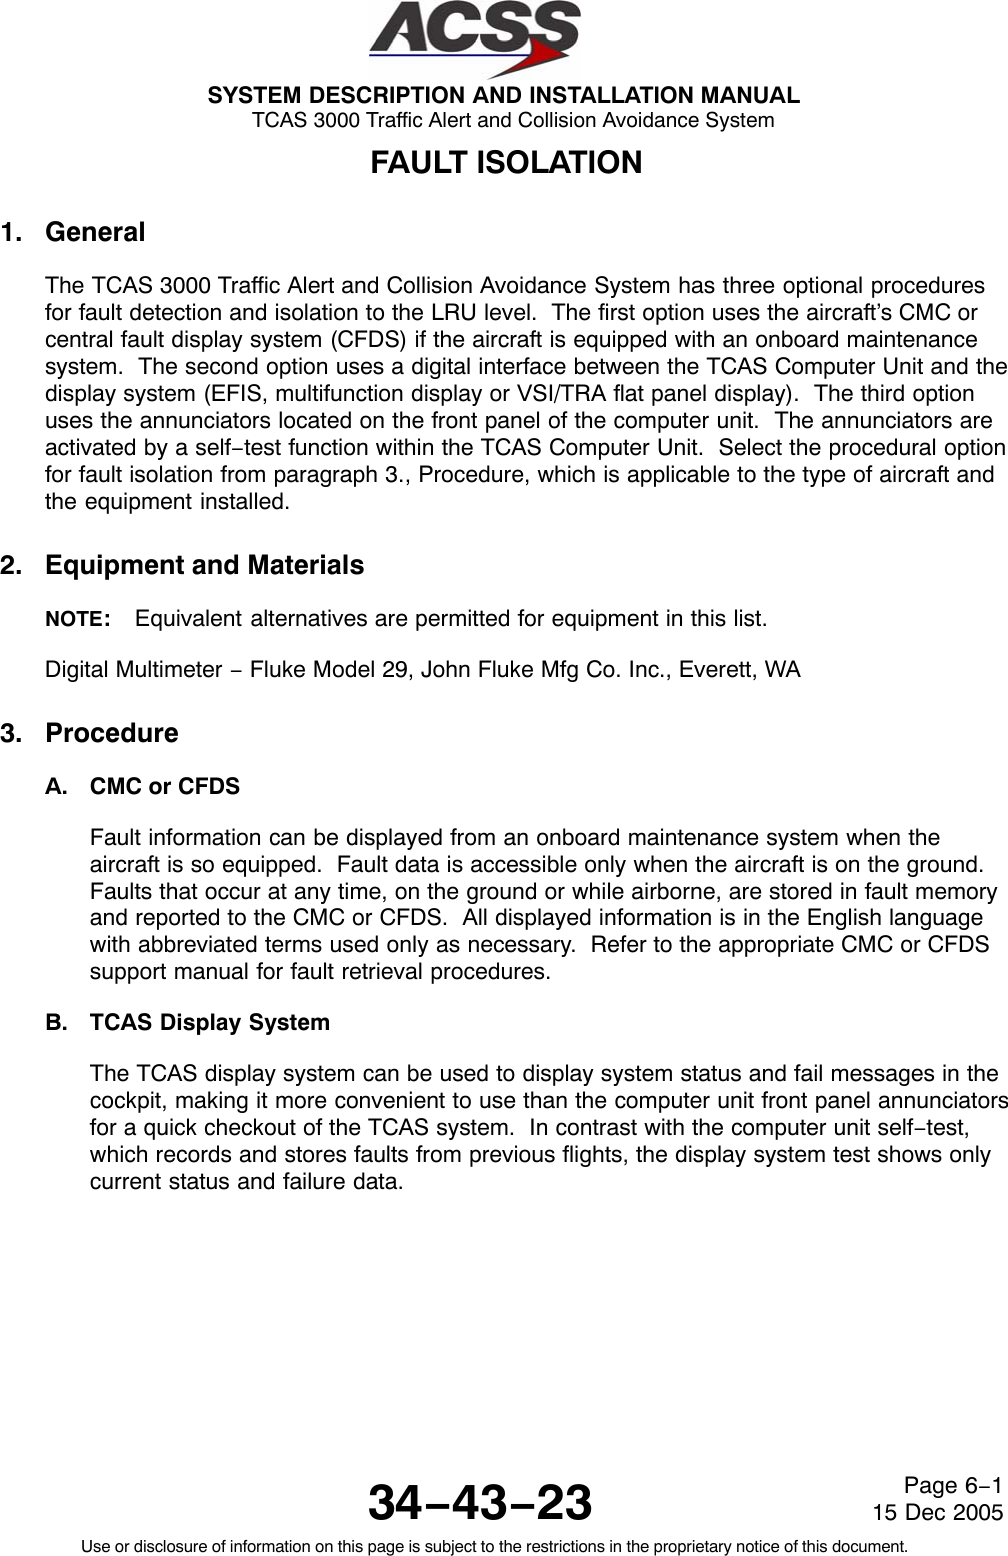 SYSTEM DESCRIPTION AND INSTALLATION MANUAL TCAS 3000 Traffic Alert and Collision Avoidance System34−43−23Use or disclosure of information on this page is subject to the restrictions in the proprietary notice of this document.Page 6−115 Dec 2005FAULT ISOLATION1. GeneralThe TCAS 3000 Traffic Alert and Collision Avoidance System has three optional proceduresfor fault detection and isolation to the LRU level.  The first option uses the aircraft’s CMC orcentral fault display system (CFDS) if the aircraft is equipped with an onboard maintenancesystem.  The second option uses a digital interface between the TCAS Computer Unit and thedisplay system (EFIS, multifunction display or VSI/TRA flat panel display).  The third optionuses the annunciators located on the front panel of the computer unit.  The annunciators areactivated by a self−test function within the TCAS Computer Unit.  Select the procedural optionfor fault isolation from paragraph 3., Procedure, which is applicable to the type of aircraft andthe equipment installed.2. Equipment and MaterialsNOTE:Equivalent alternatives are permitted for equipment in this list.Digital Multimeter − Fluke Model 29, John Fluke Mfg Co. Inc., Everett, WA3. ProcedureA. CMC or CFDSFault information can be displayed from an onboard maintenance system when theaircraft is so equipped.  Fault data is accessible only when the aircraft is on the ground.Faults that occur at any time, on the ground or while airborne, are stored in fault memoryand reported to the CMC or CFDS.  All displayed information is in the English languagewith abbreviated terms used only as necessary.  Refer to the appropriate CMC or CFDSsupport manual for fault retrieval procedures.B. TCAS Display SystemThe TCAS display system can be used to display system status and fail messages in thecockpit, making it more convenient to use than the computer unit front panel annunciatorsfor a quick checkout of the TCAS system.  In contrast with the computer unit self−test,which records and stores faults from previous flights, the display system test shows onlycurrent status and failure data.